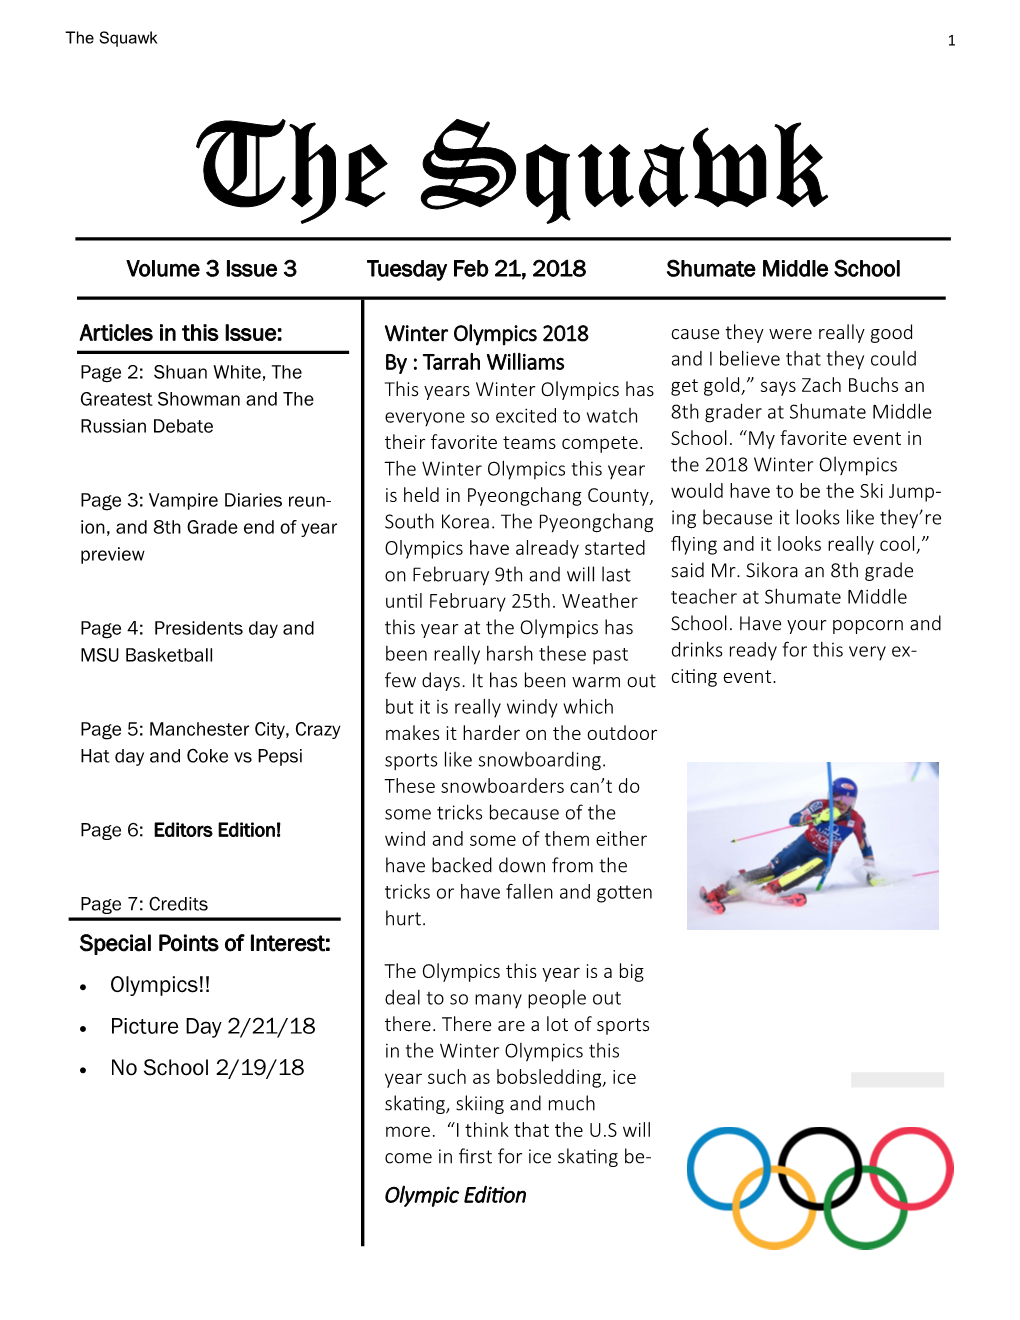 Articles in This Issue: Special Points of Interest: • Olympics!! • Picture Day 2/21/18 • No School 2/19/18 Volume 3 Issue